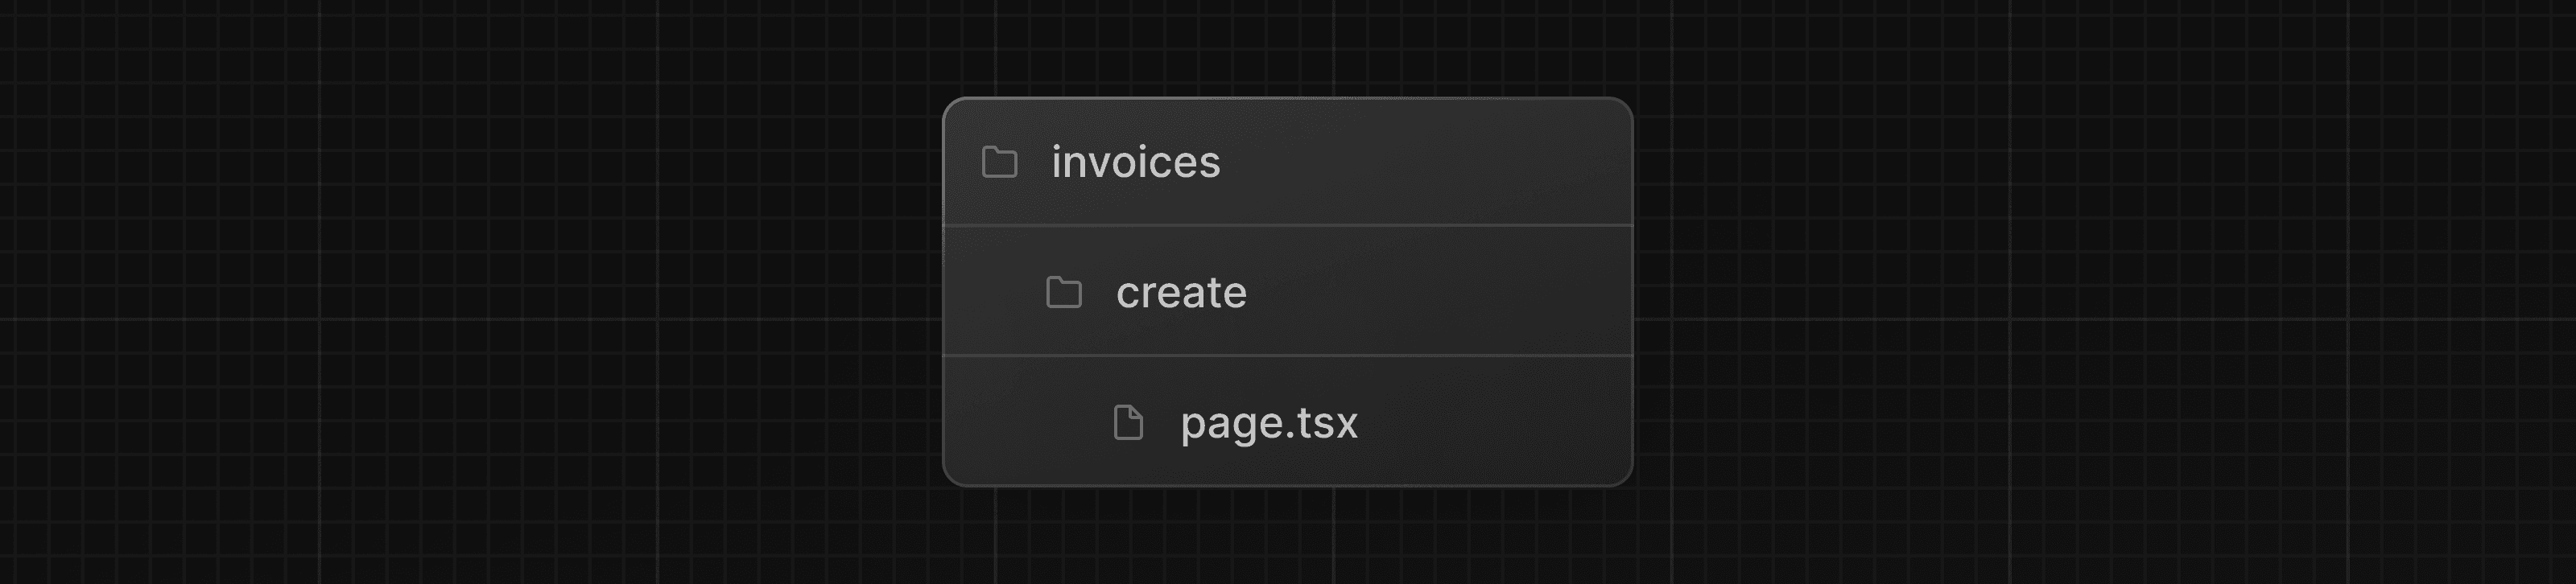 Invoices folder with a nested create folder, and a page.tsx file inside it